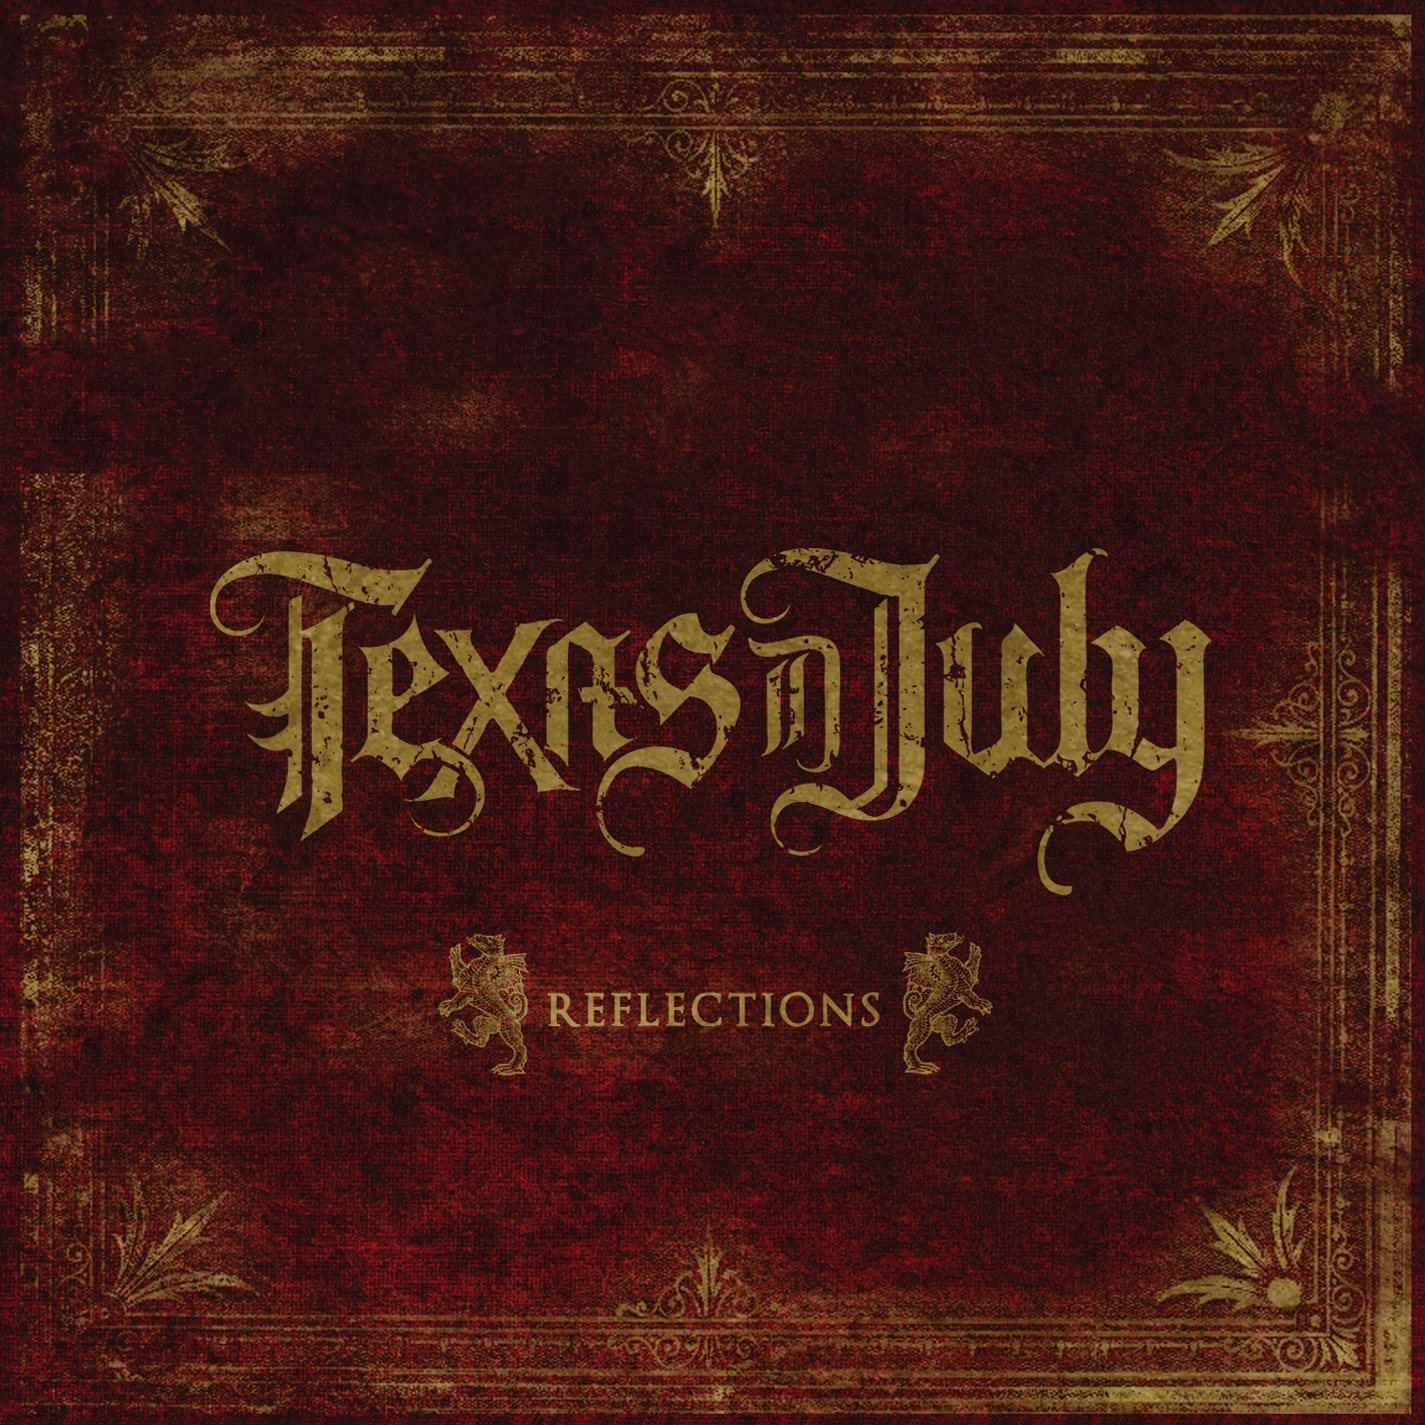 Texas In July-Reflections-16BIT-WEB-FLAC-2013-VEXED